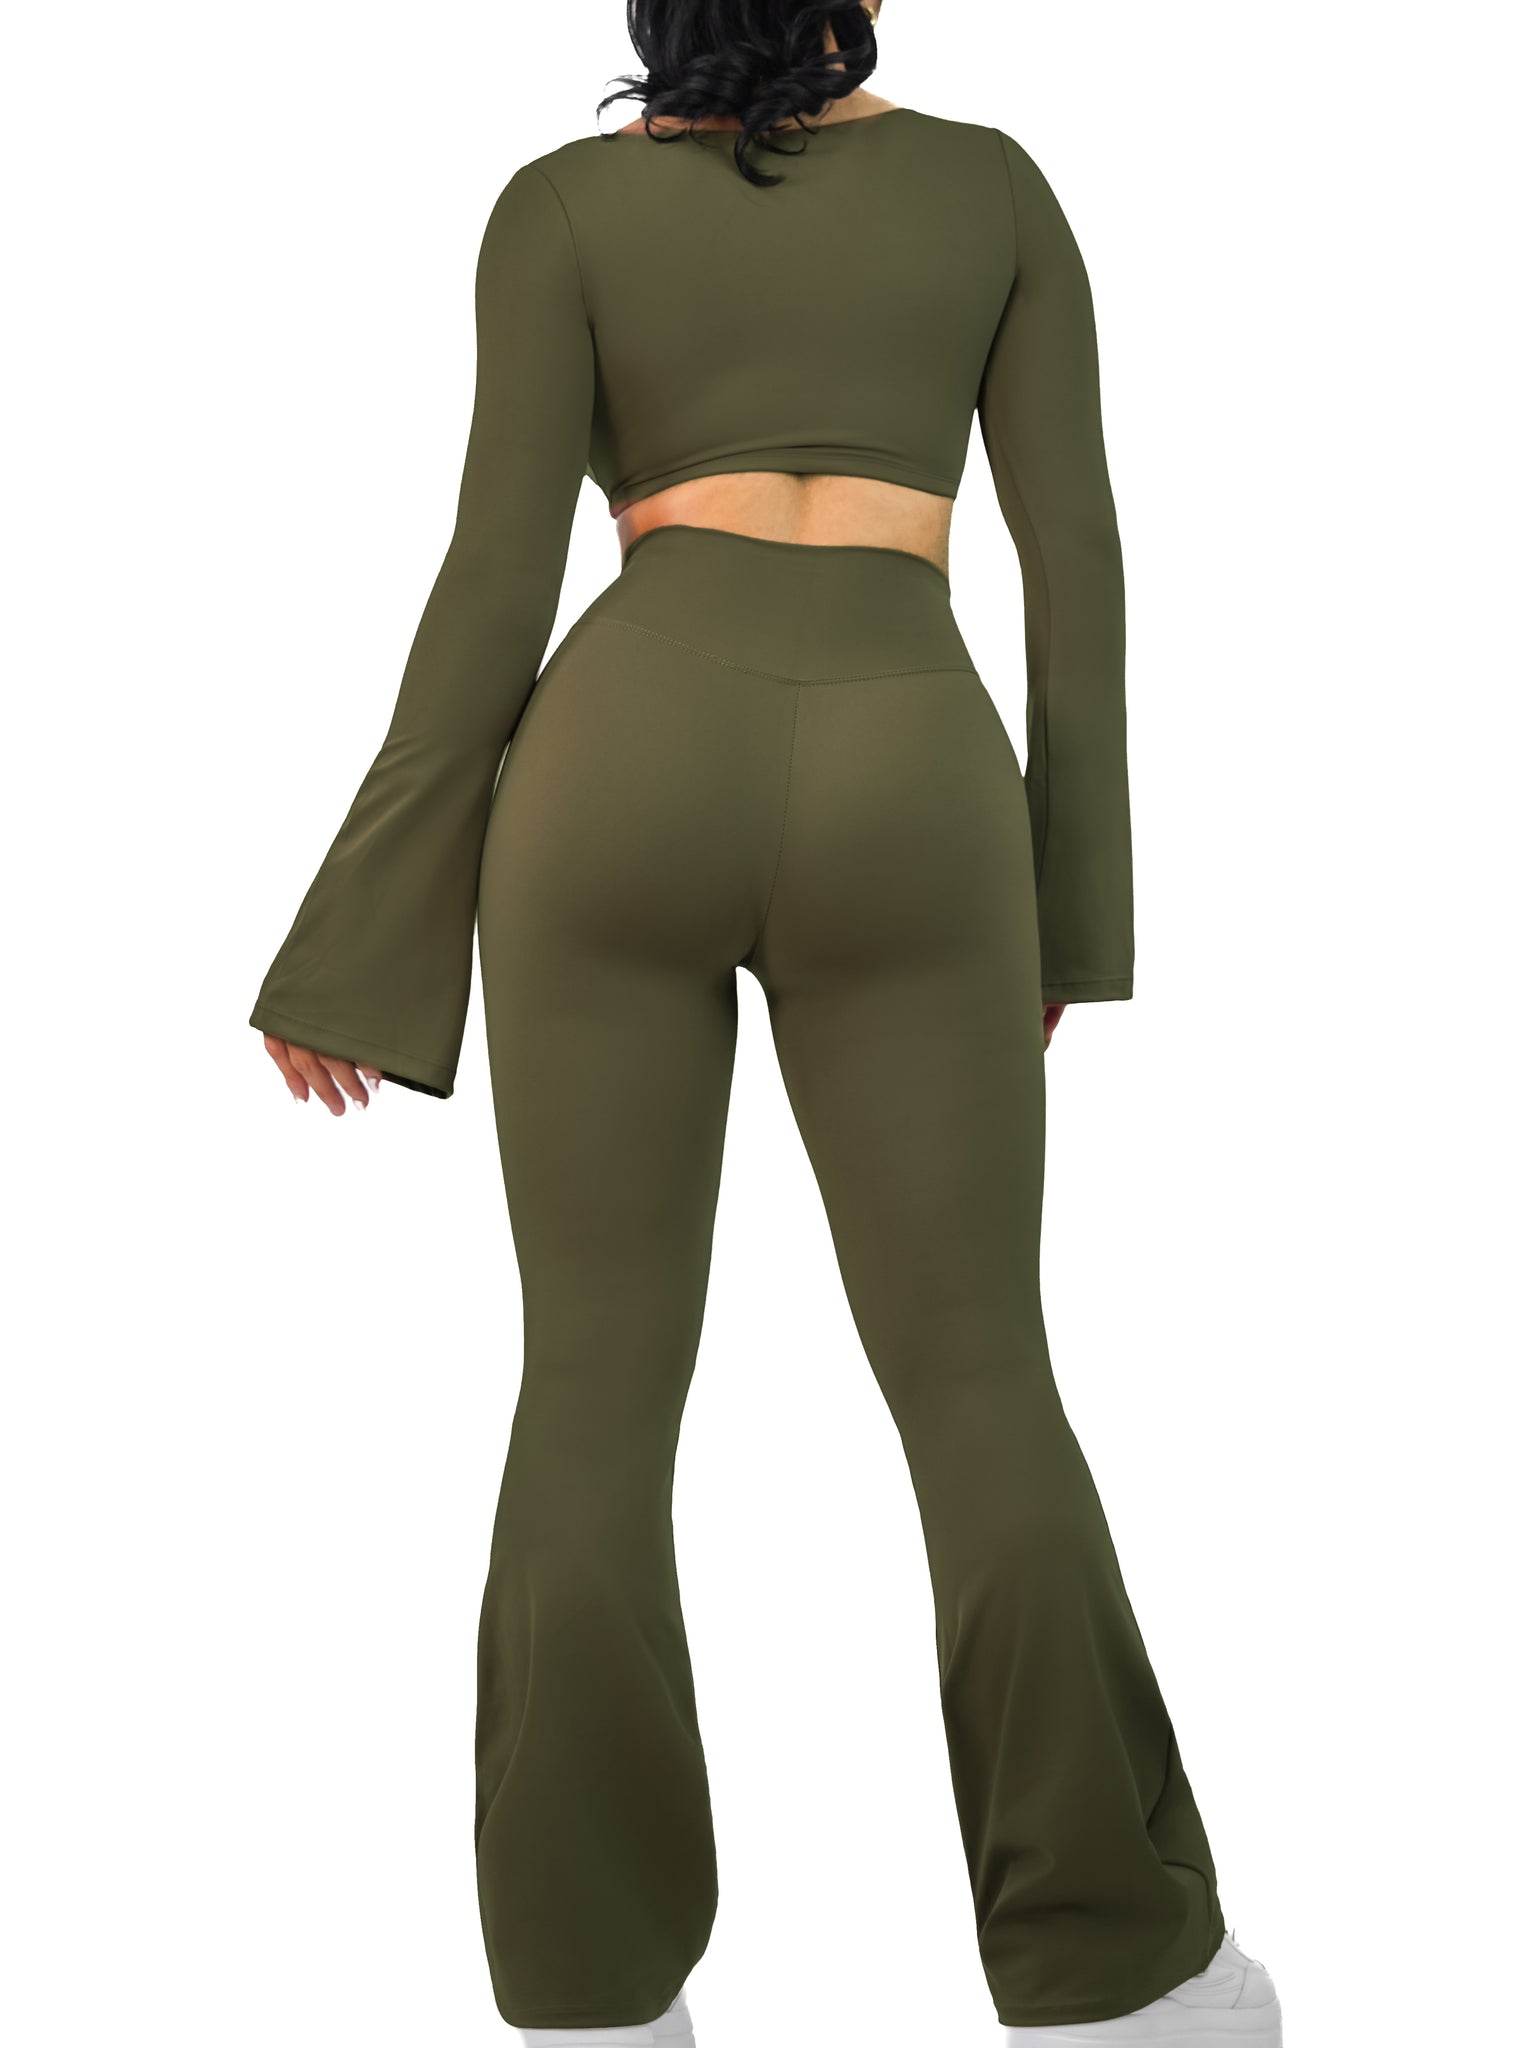 Bootcut Flare Seamless Leggings (Wild Green) – Fitness Fashioness